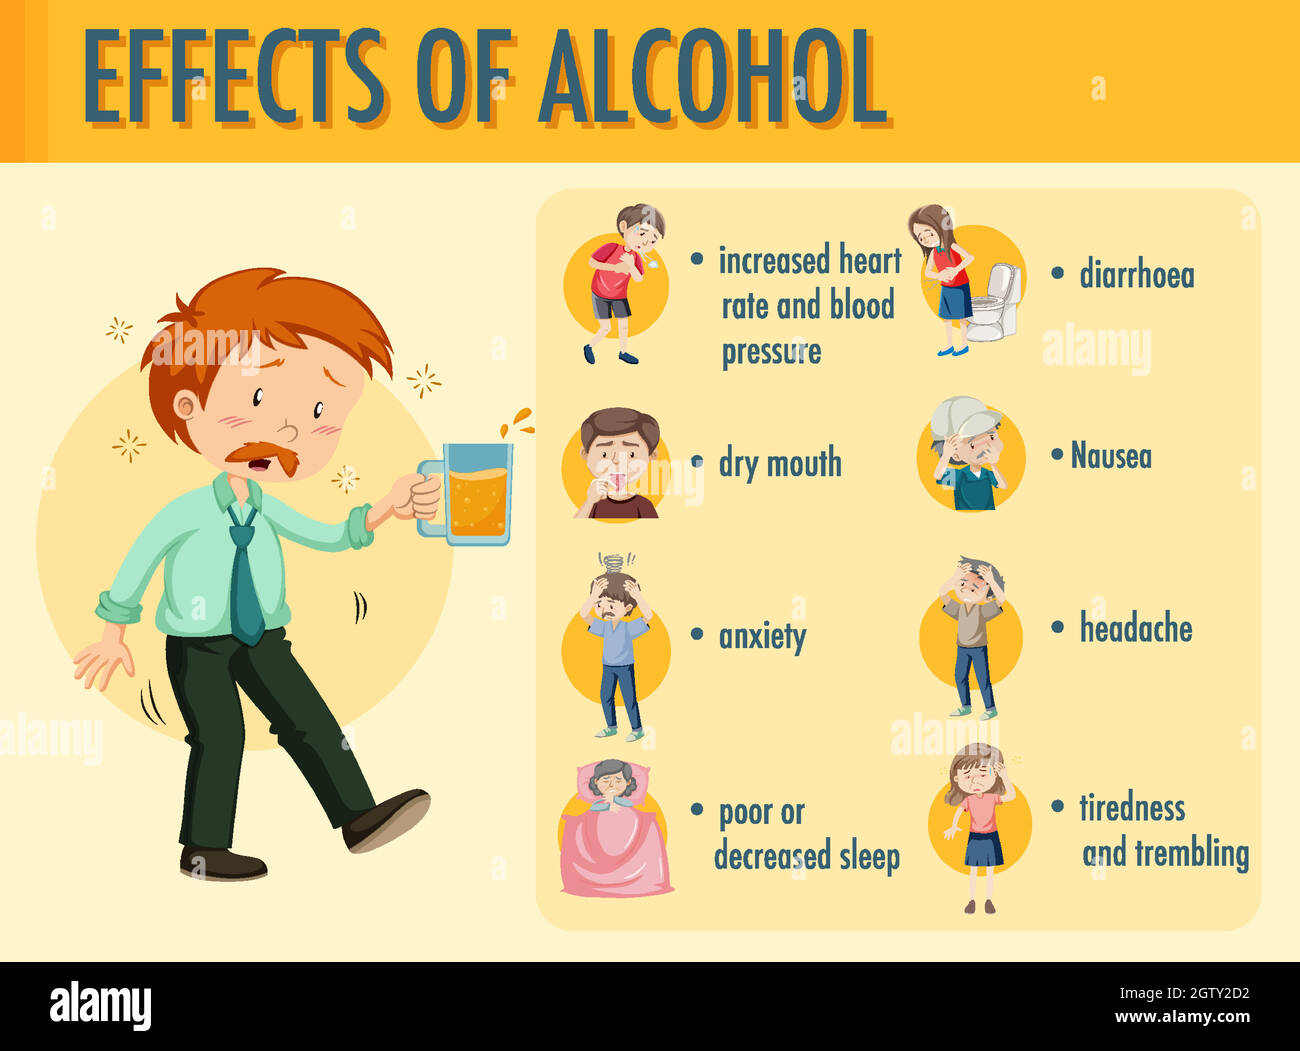 Effects of alcohol information infographic Stock Vector